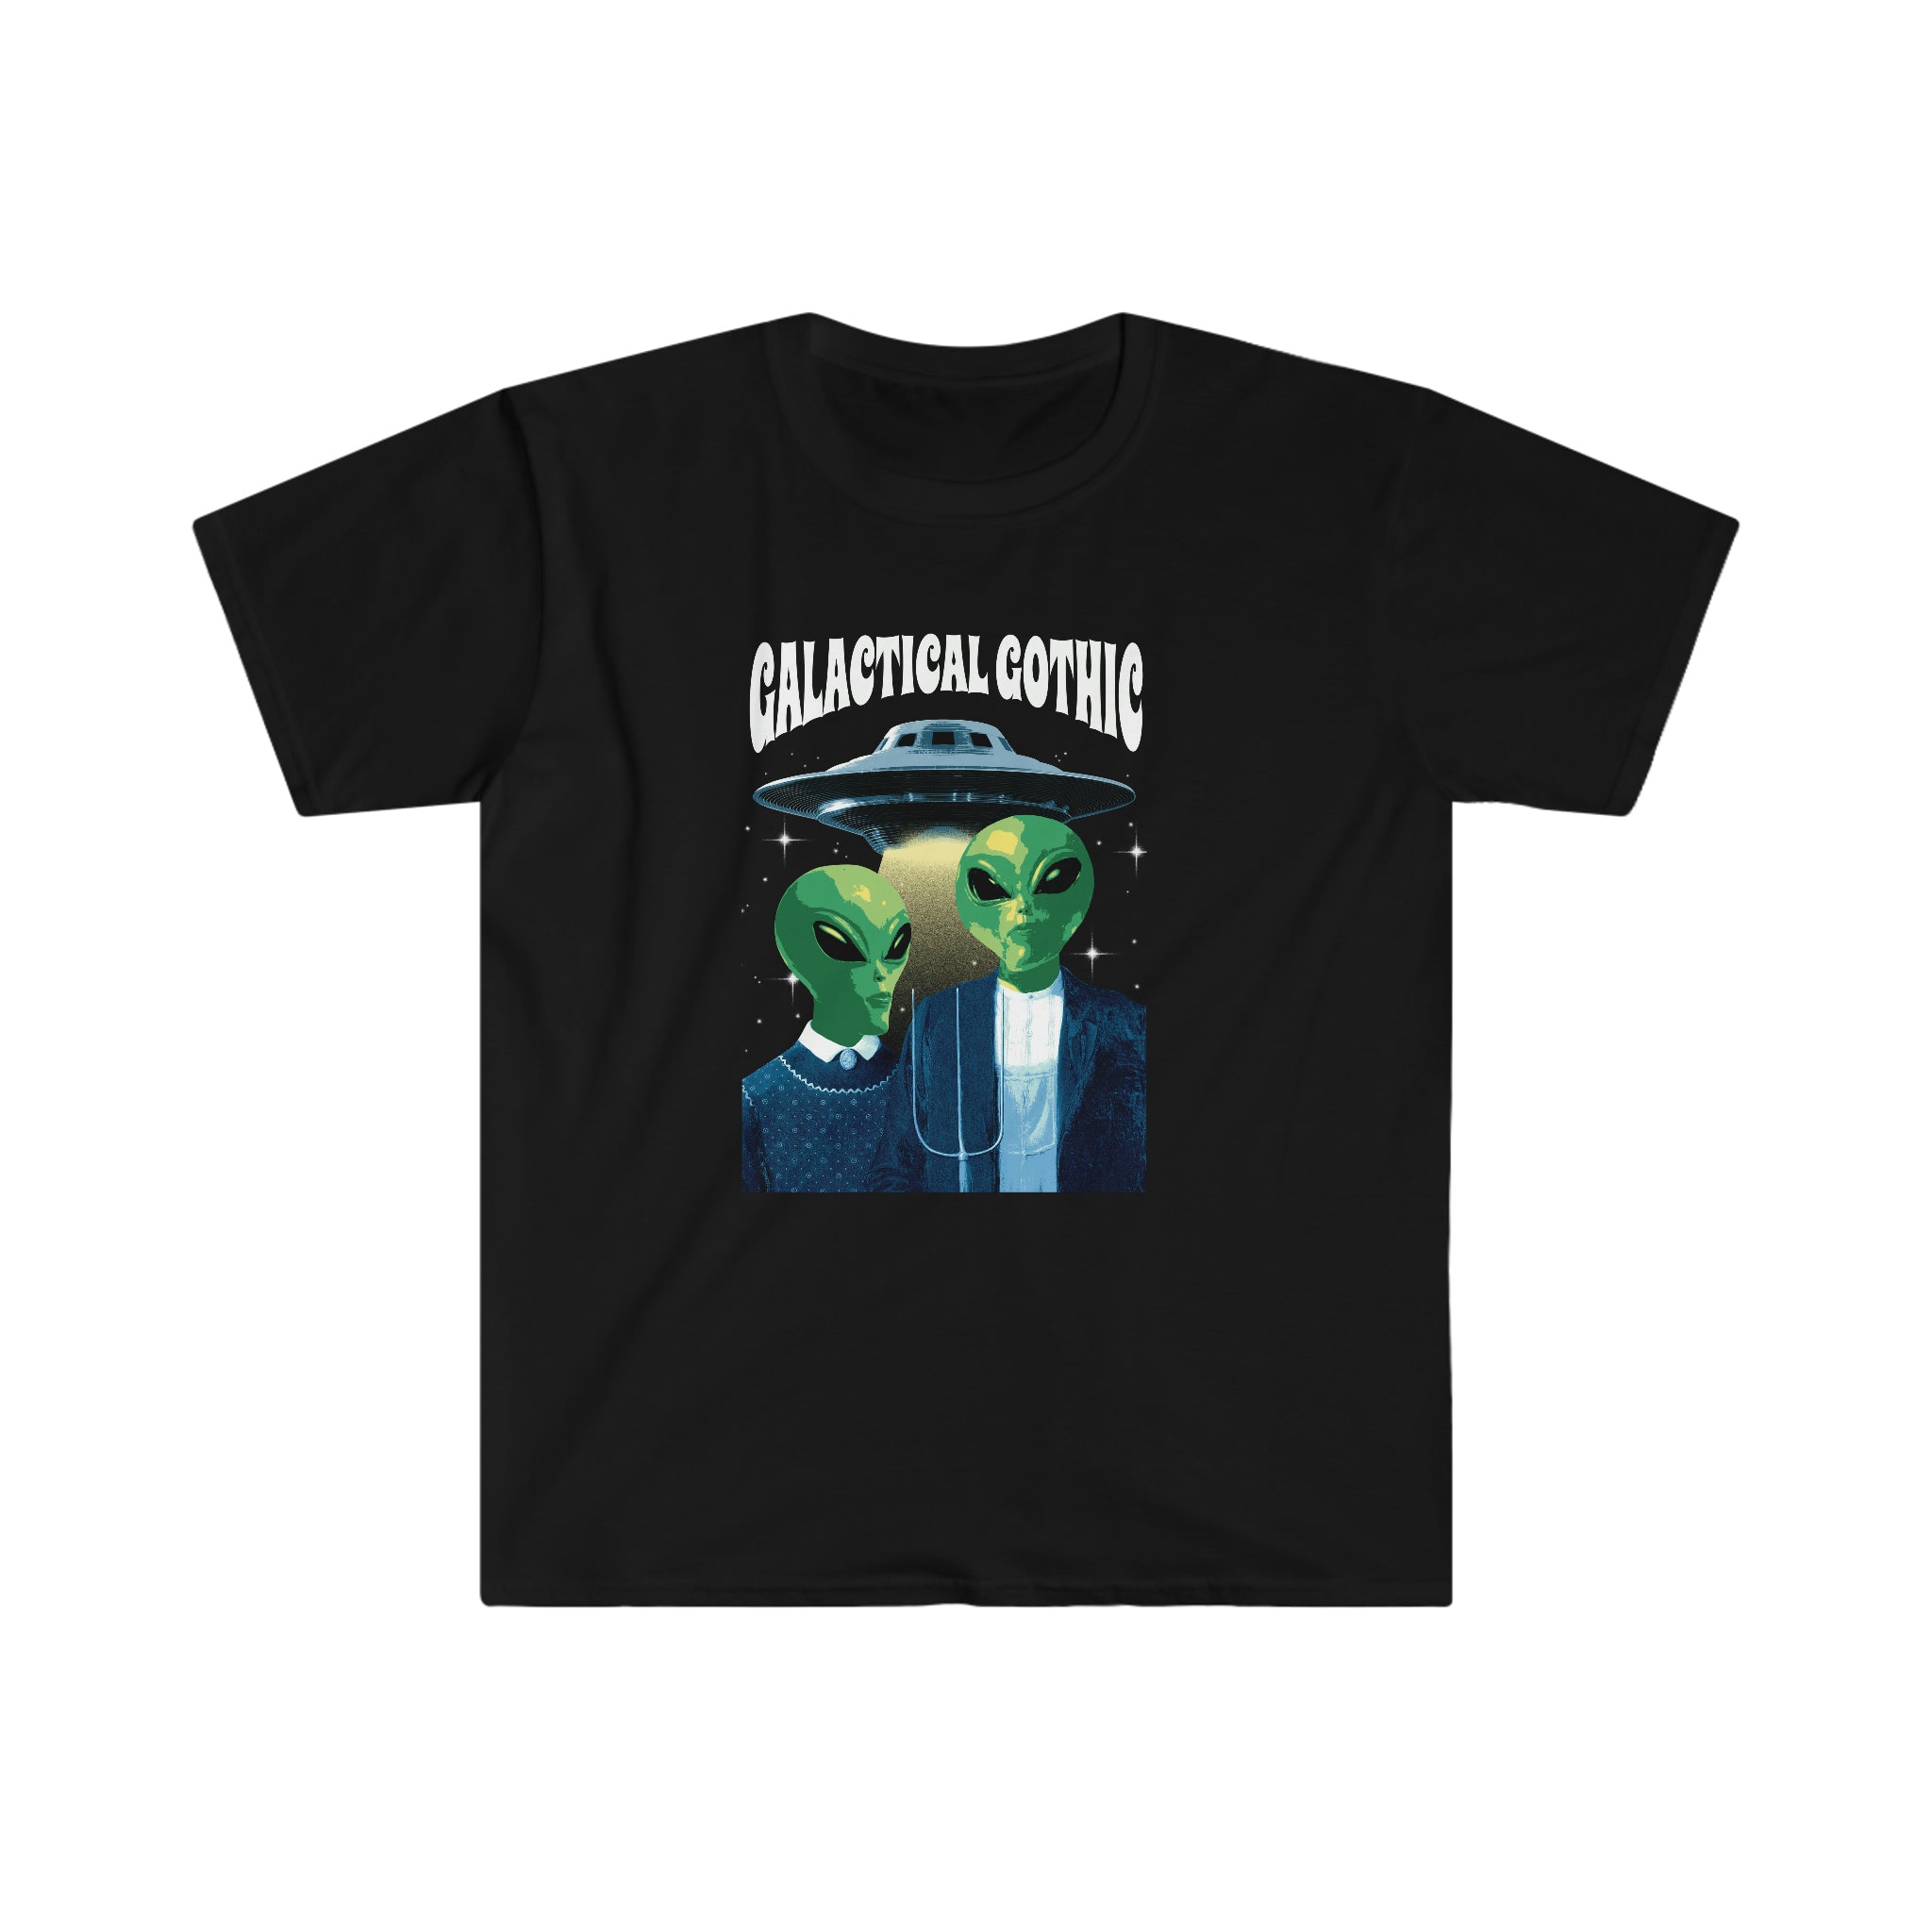 A black t - shirt with two American Gothic UFOs on it.